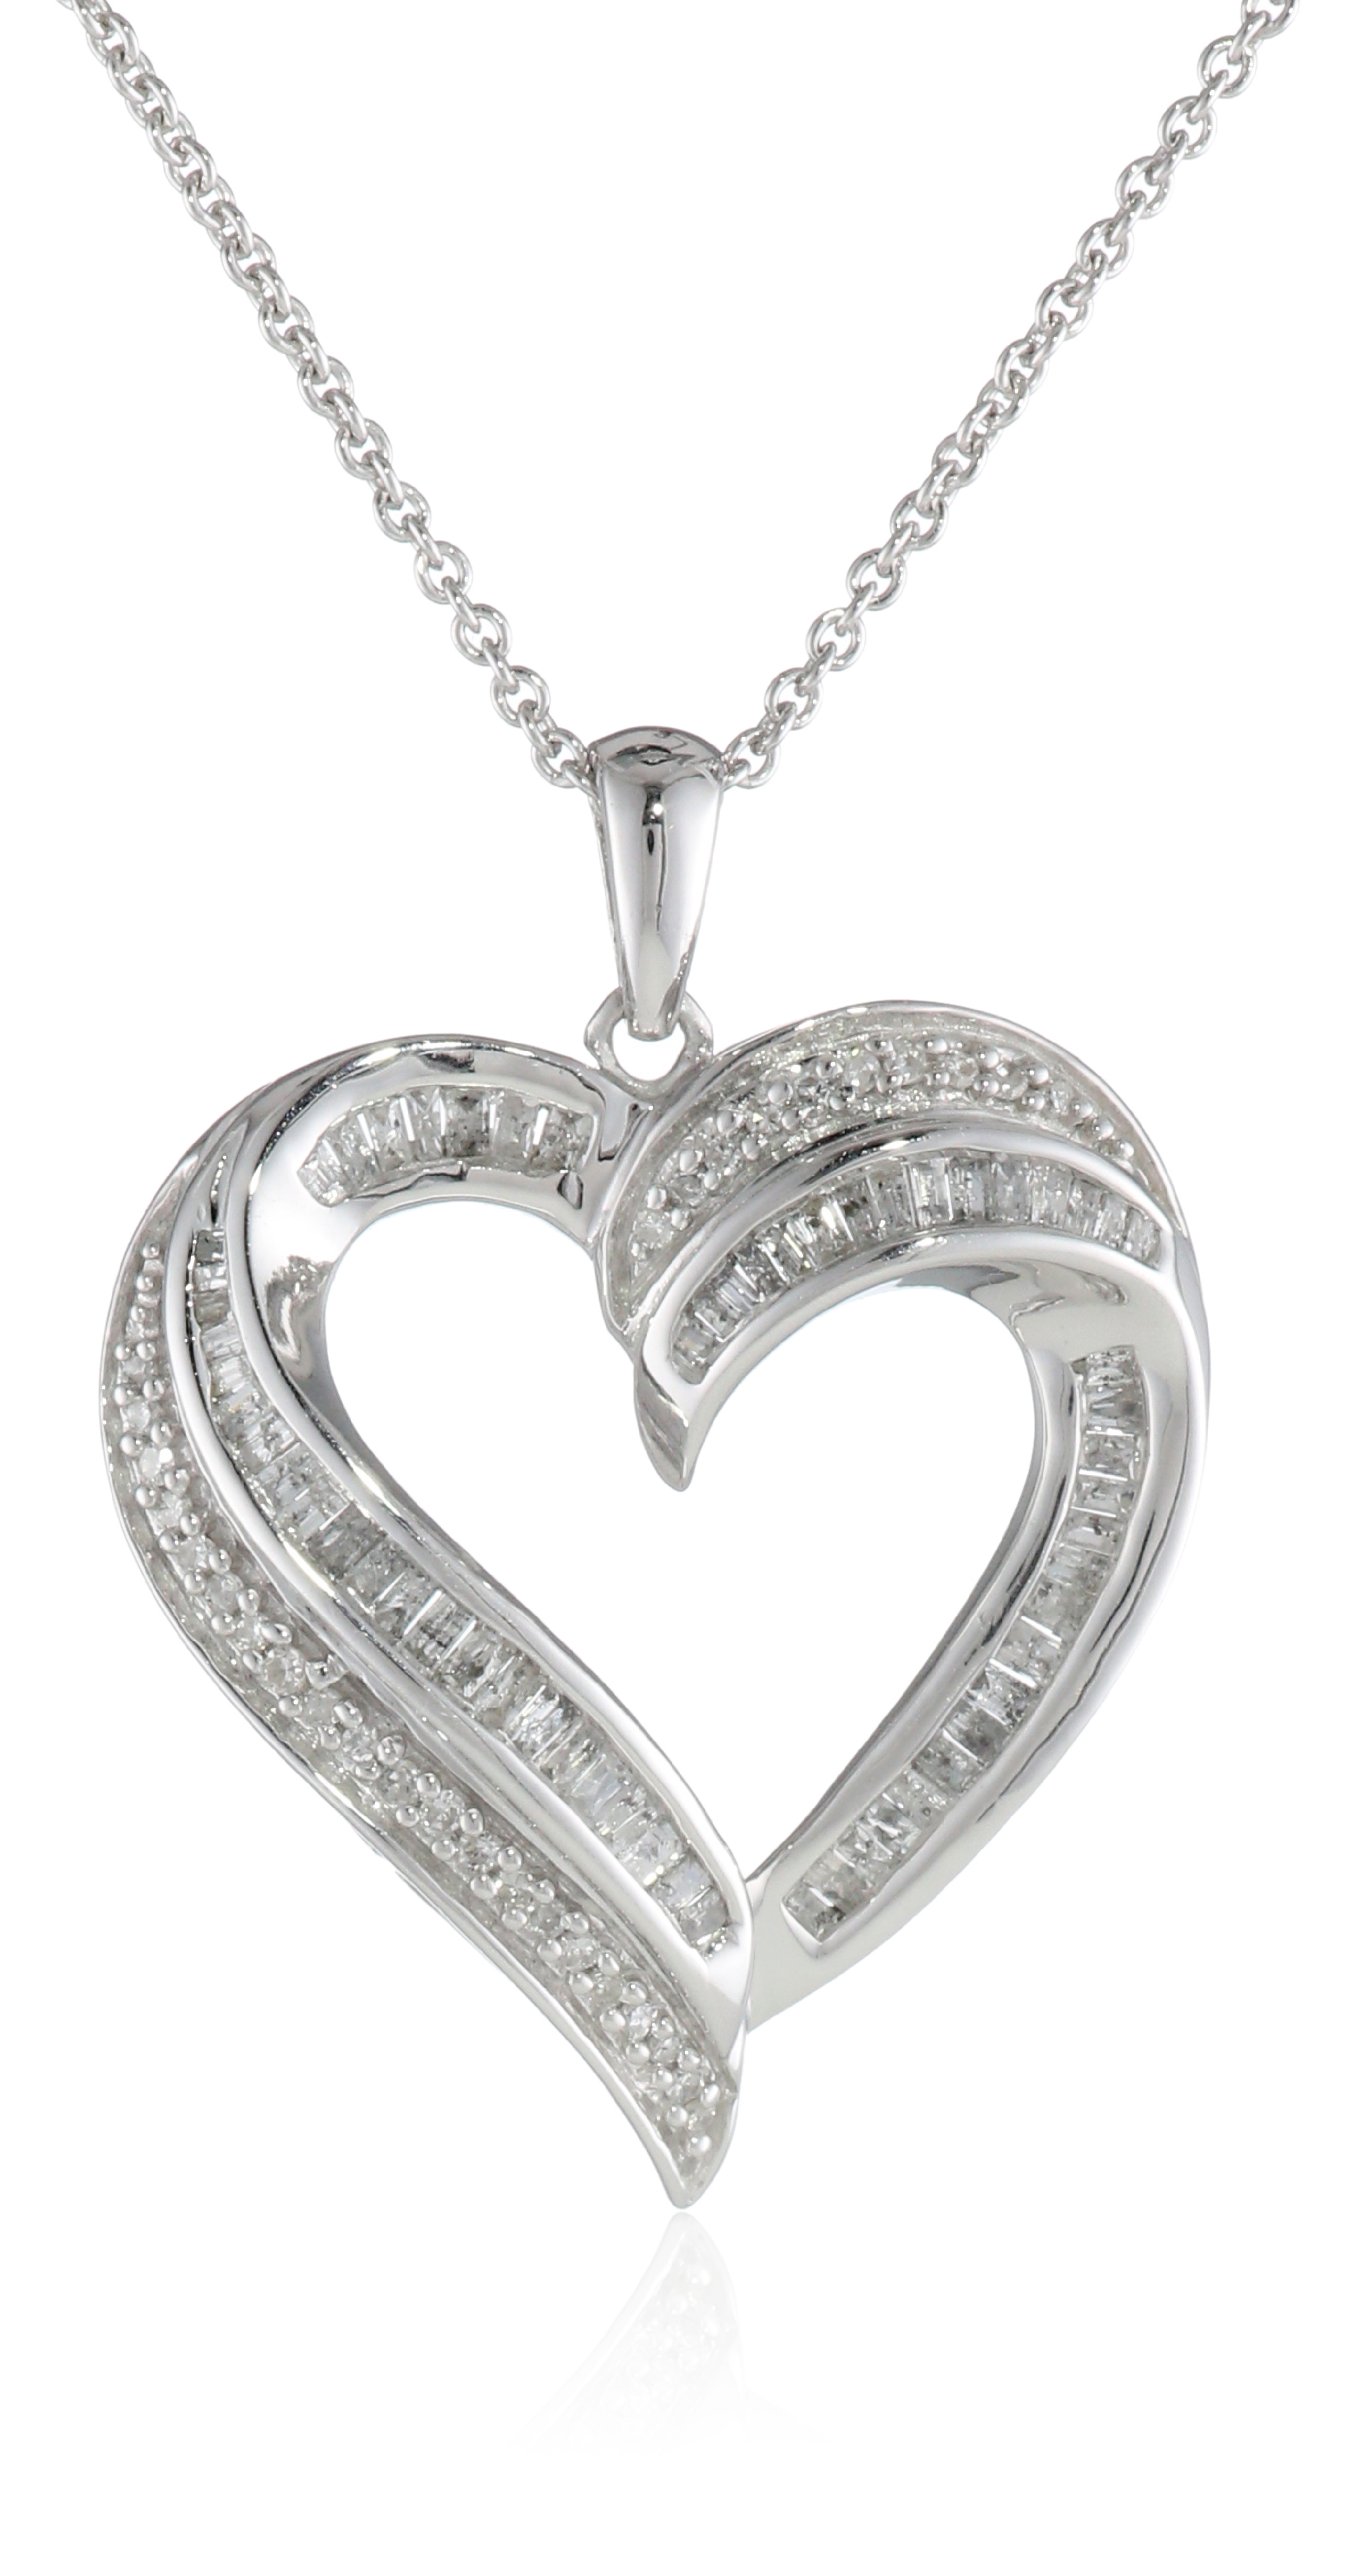 Amazon Collection women Sterling Silver Diamond Heart Pendant Necklace (1/2 cttw), 18